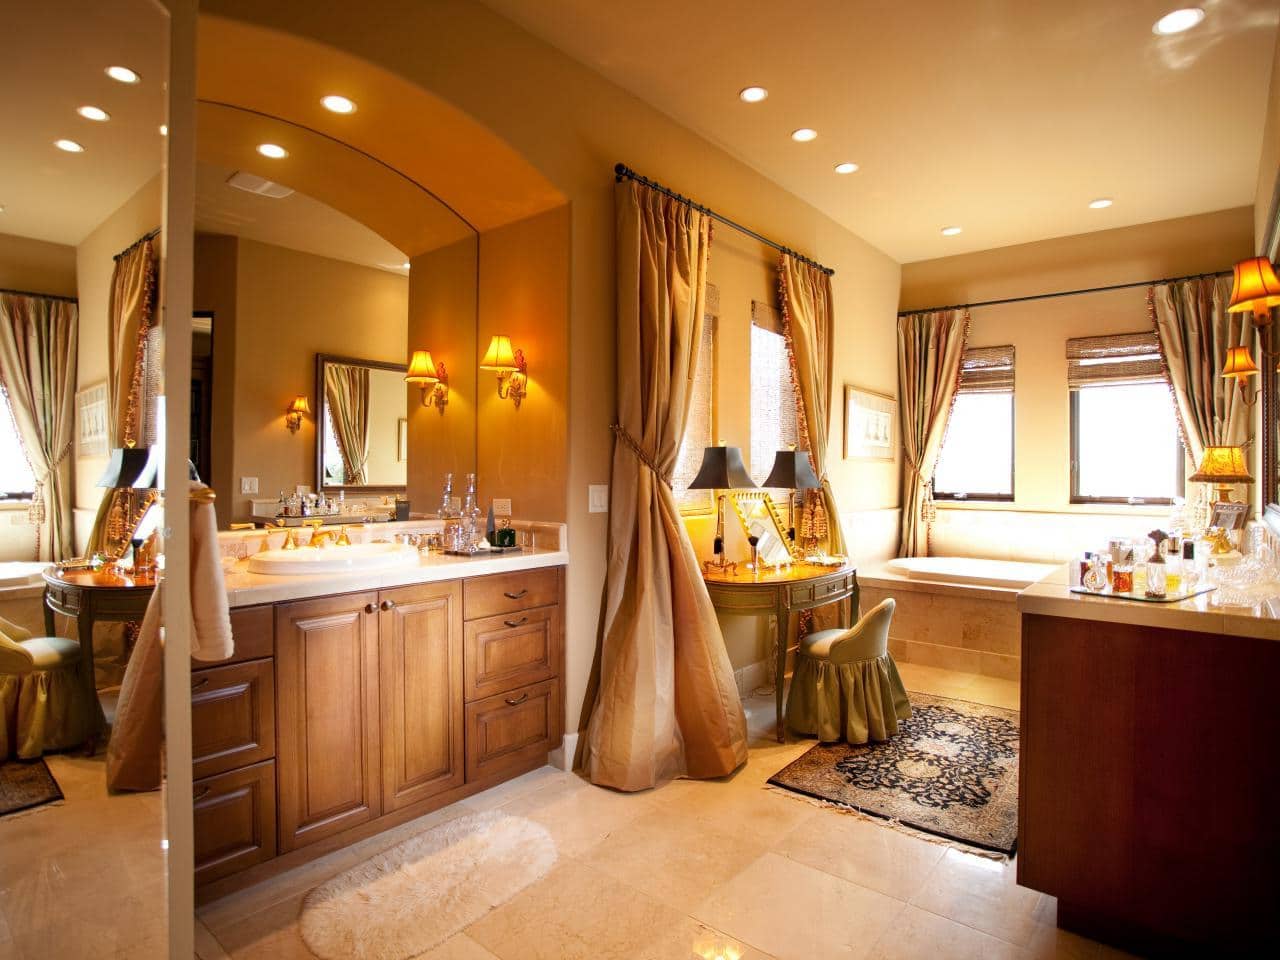 Boudoir Interior Design Ideas for the Refined Woman's Taste. Nice Art deco styled bathroom with noble gold and brown tints